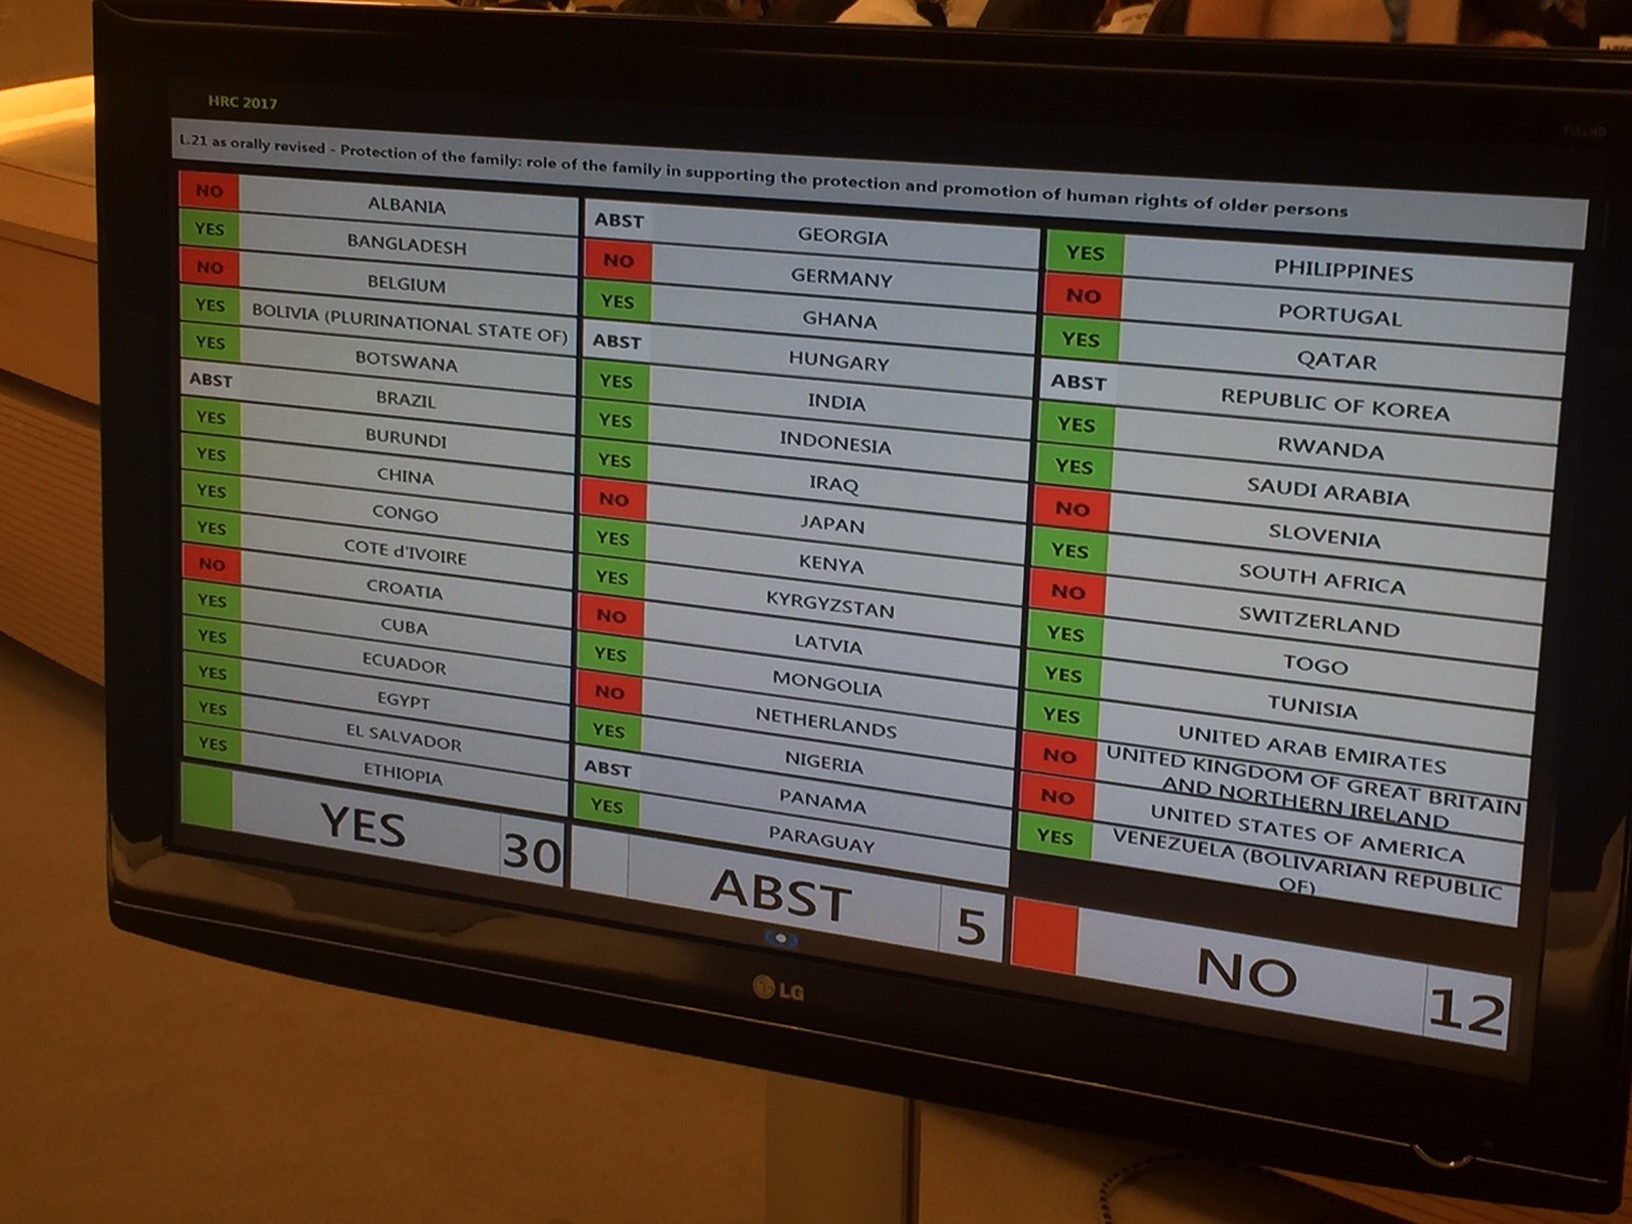  _145_https://www.helpage.org/silo/images/human-rights-council-votes-on-families-resolution_1632x1224.jpg